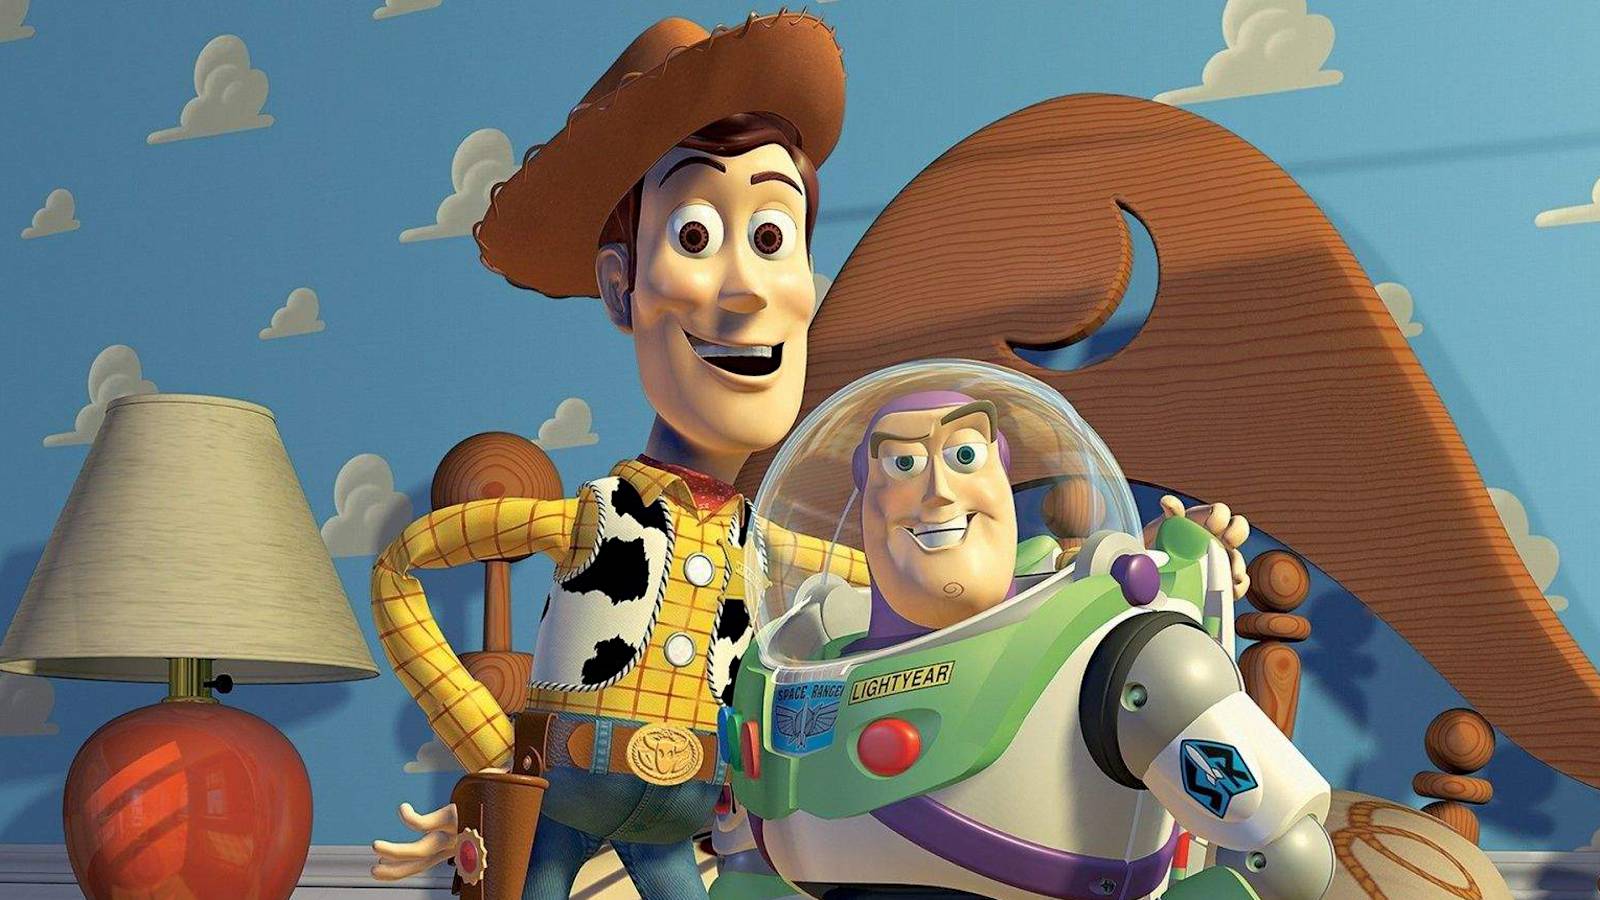 The 11 Most Wholesome Movies for Families to Watch Together